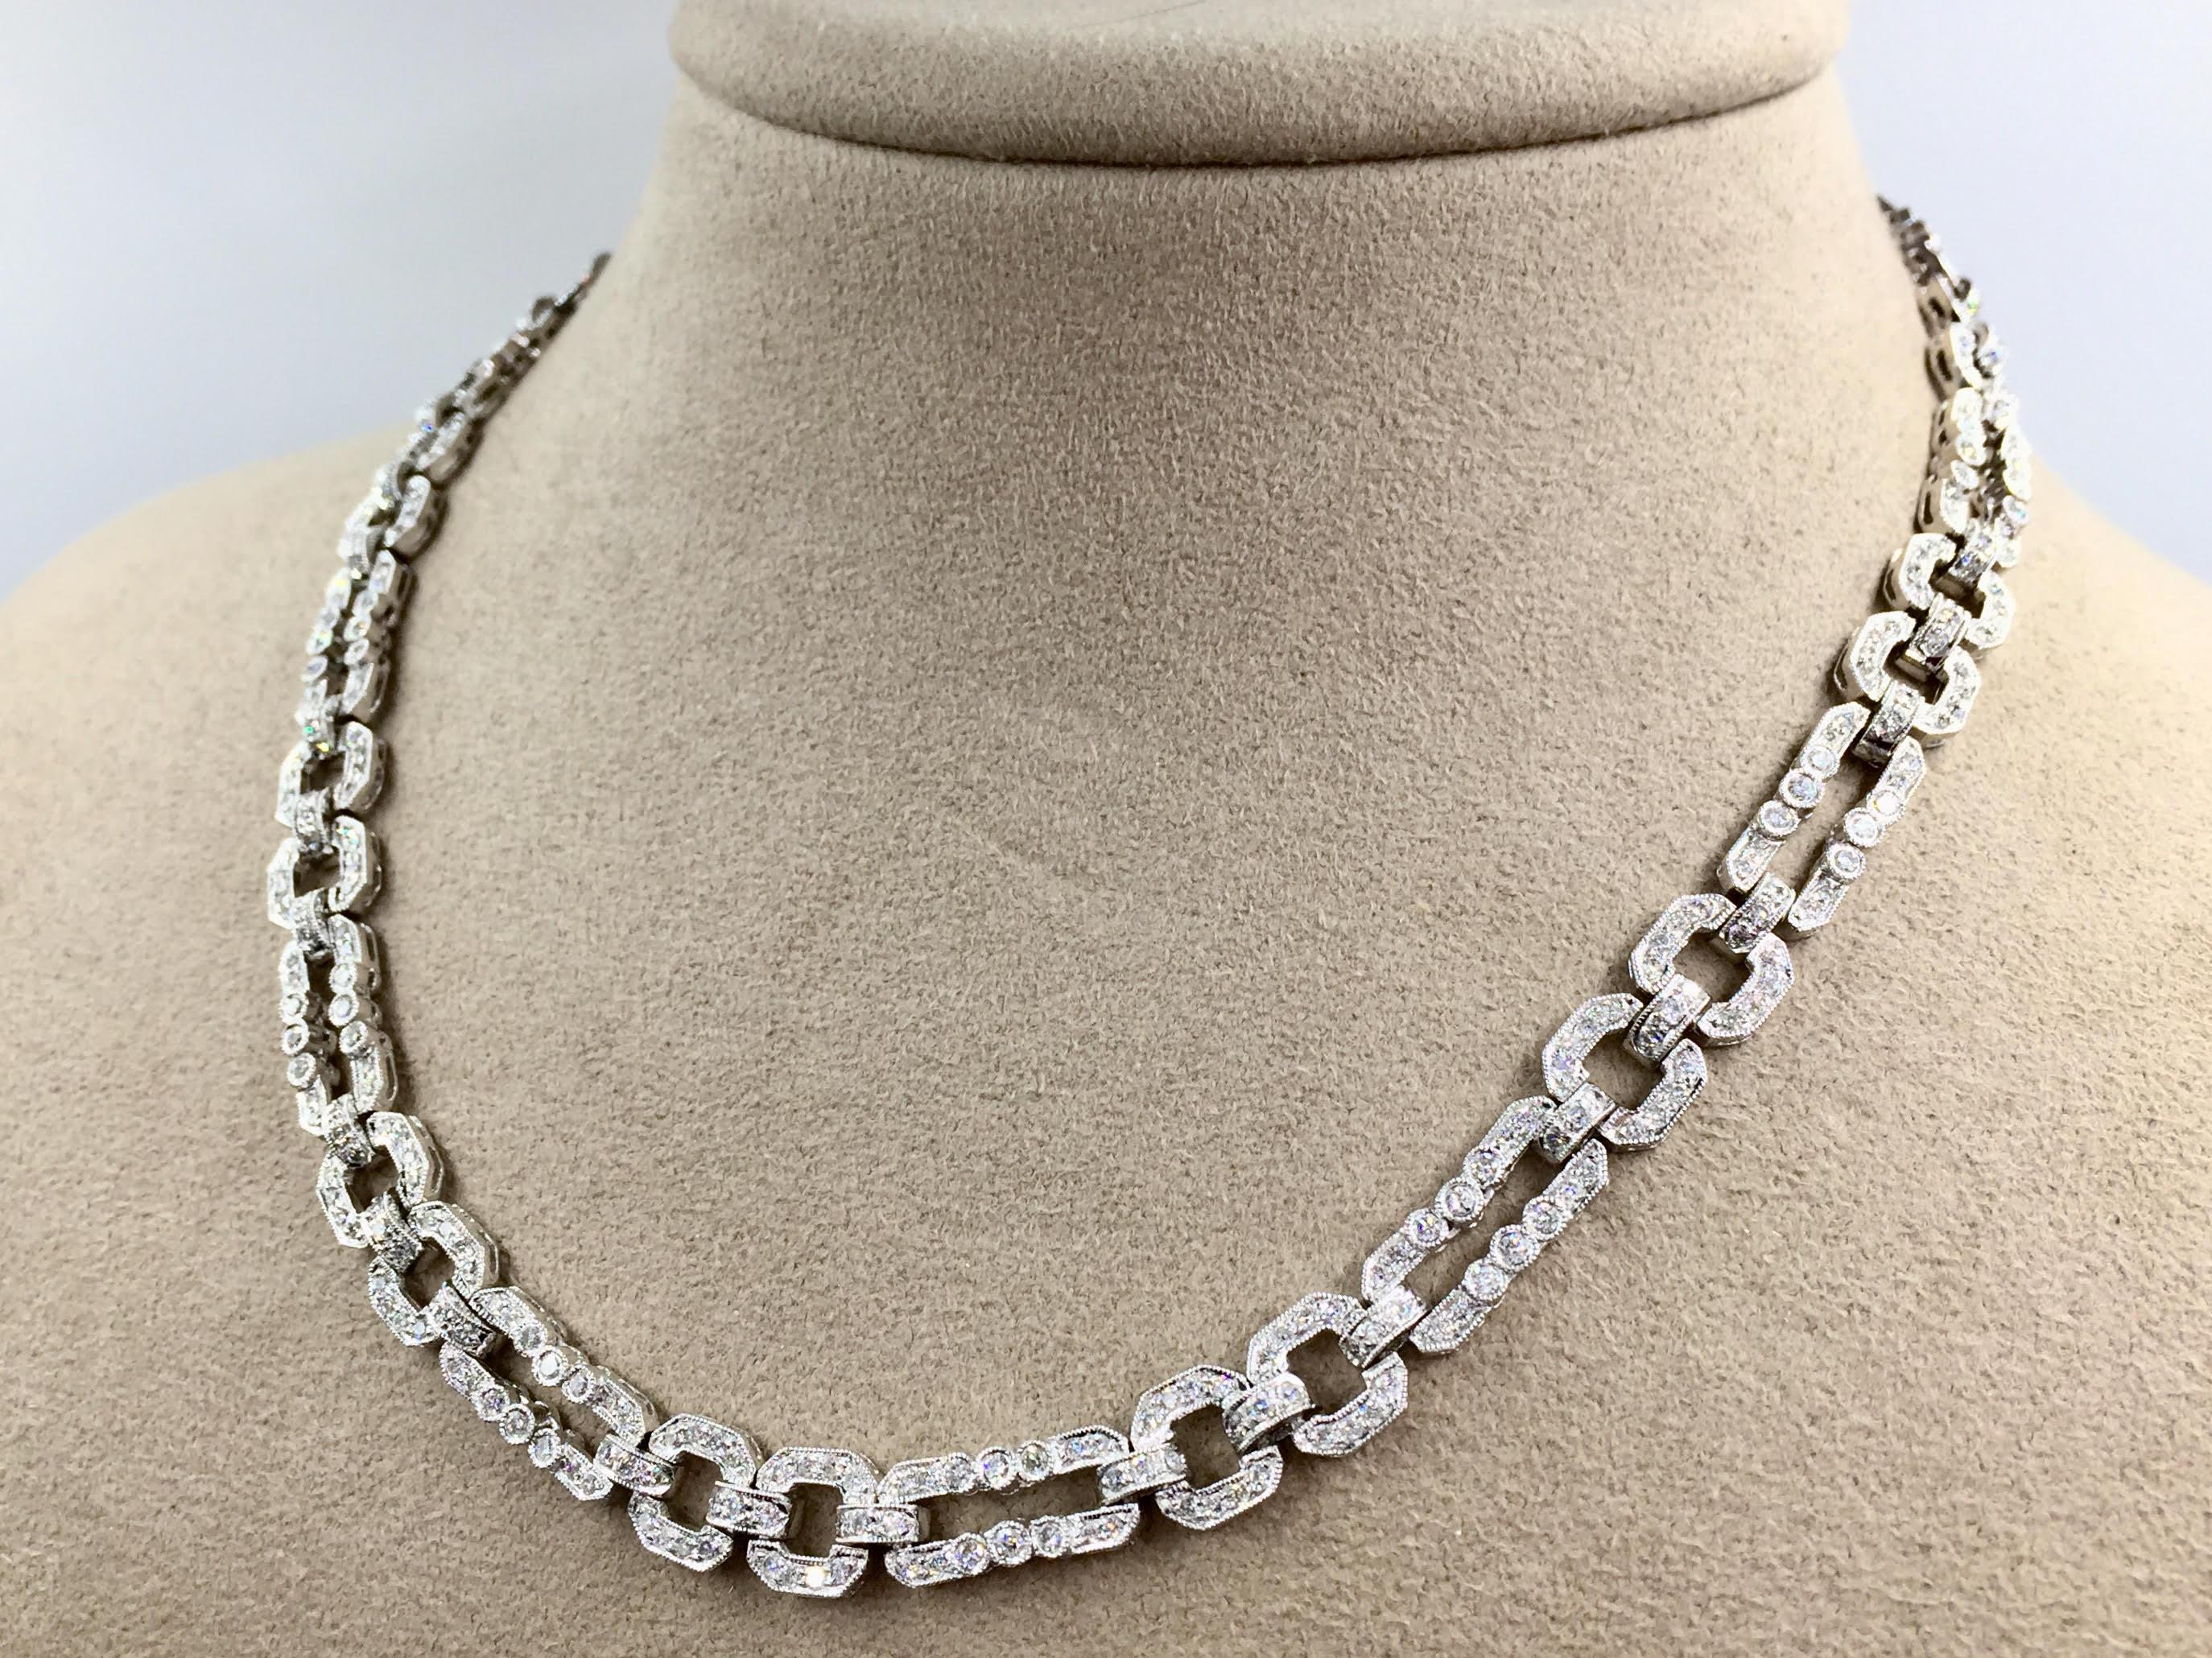 This beautiful retro 18k white gold diamond link necklace is made with fine craftsmanship and attention to detail including delicate beading all along the edges of each link and an estimated 5.00 carats total weight of round brilliant diamonds.